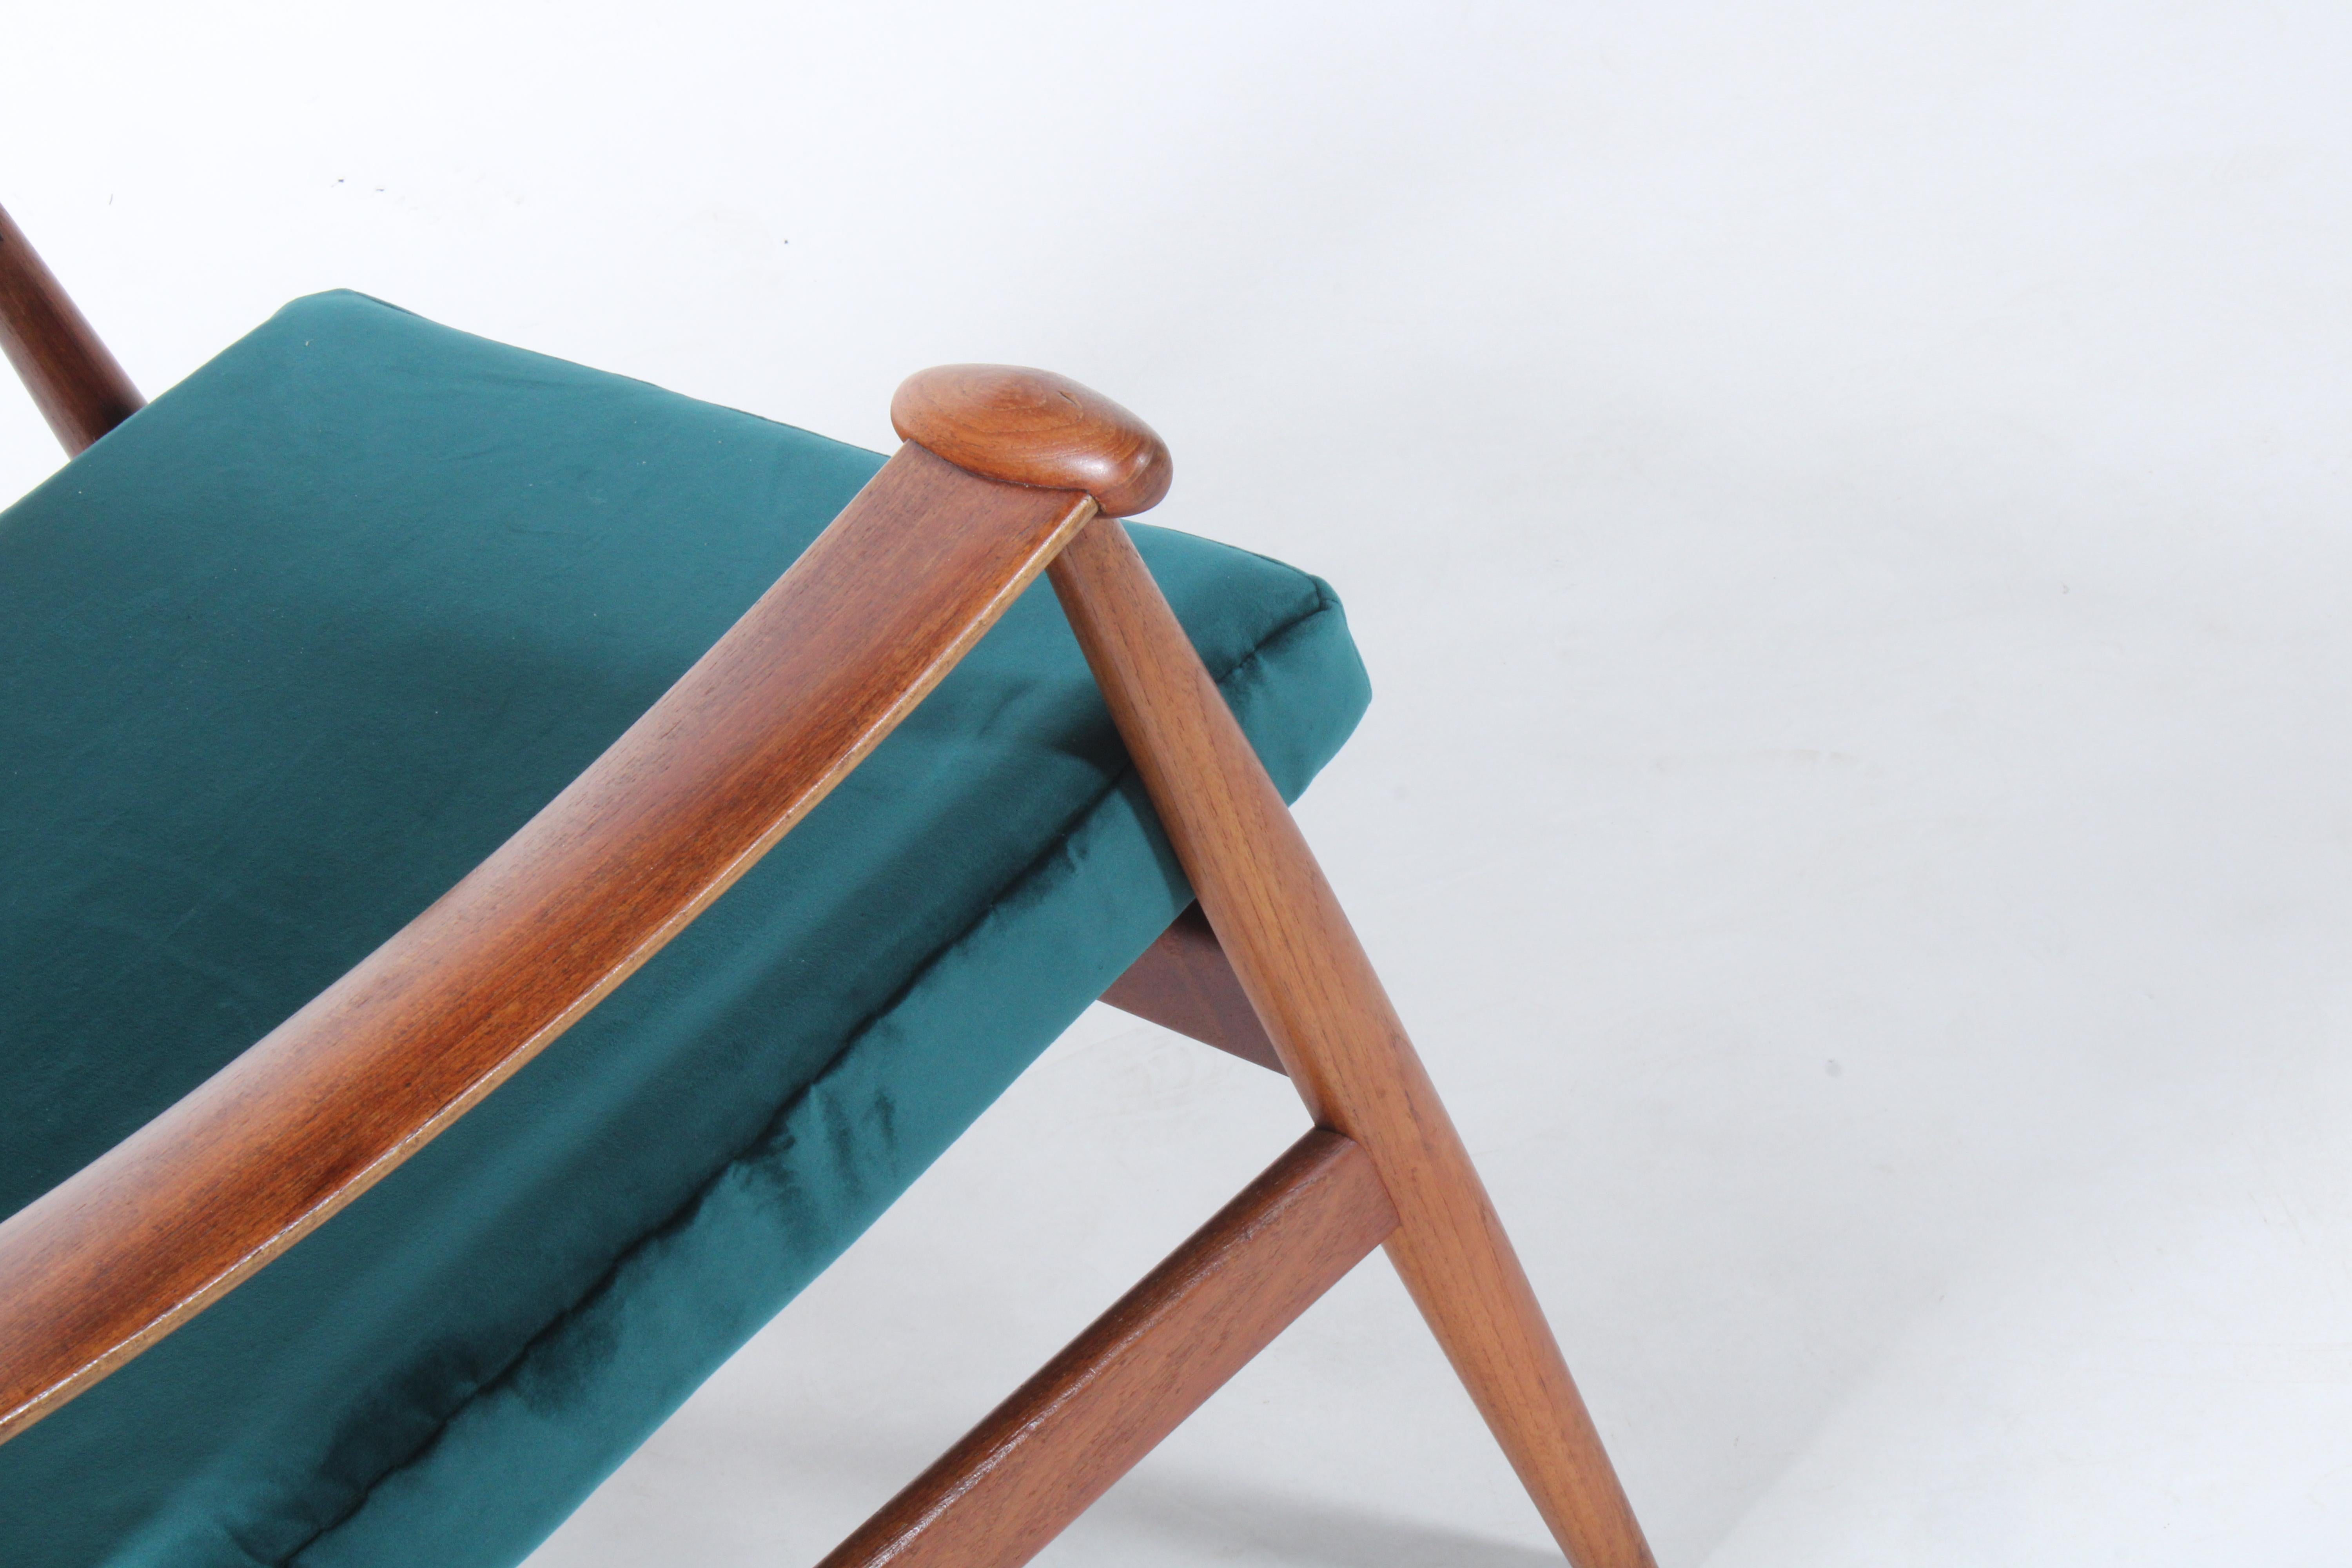 Exquisite Mid Century Danish Spade Chair By Finn Juhl For France & Son In Teak For Sale 2